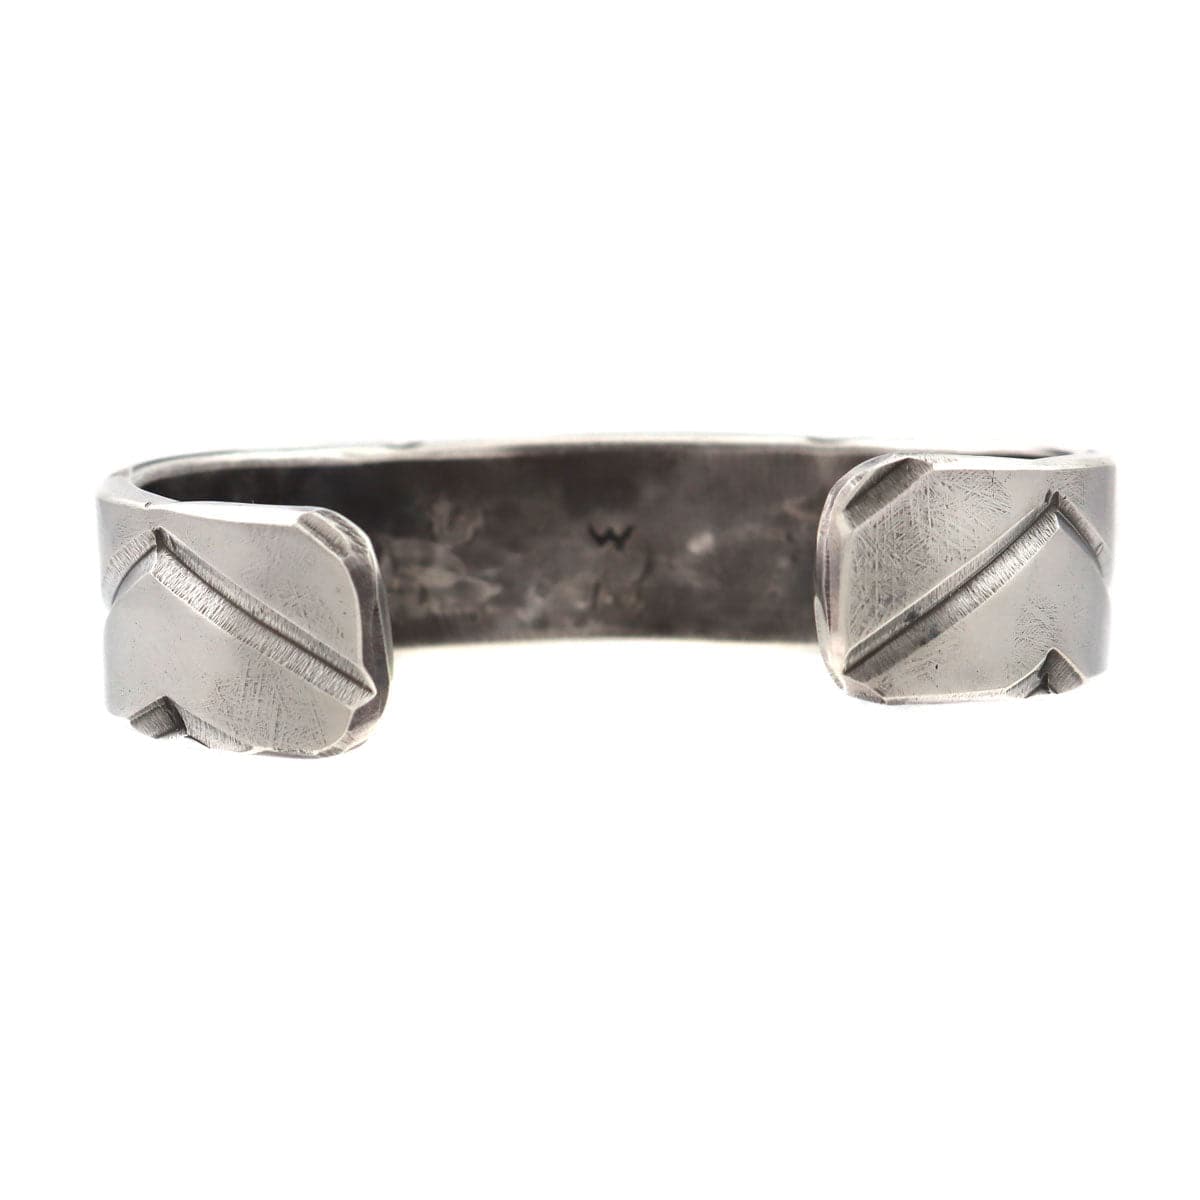 Miramontes - Silver Cuff #2 with Deeply Stamped Geometric Design, size 7 (J91305-1221-002)2